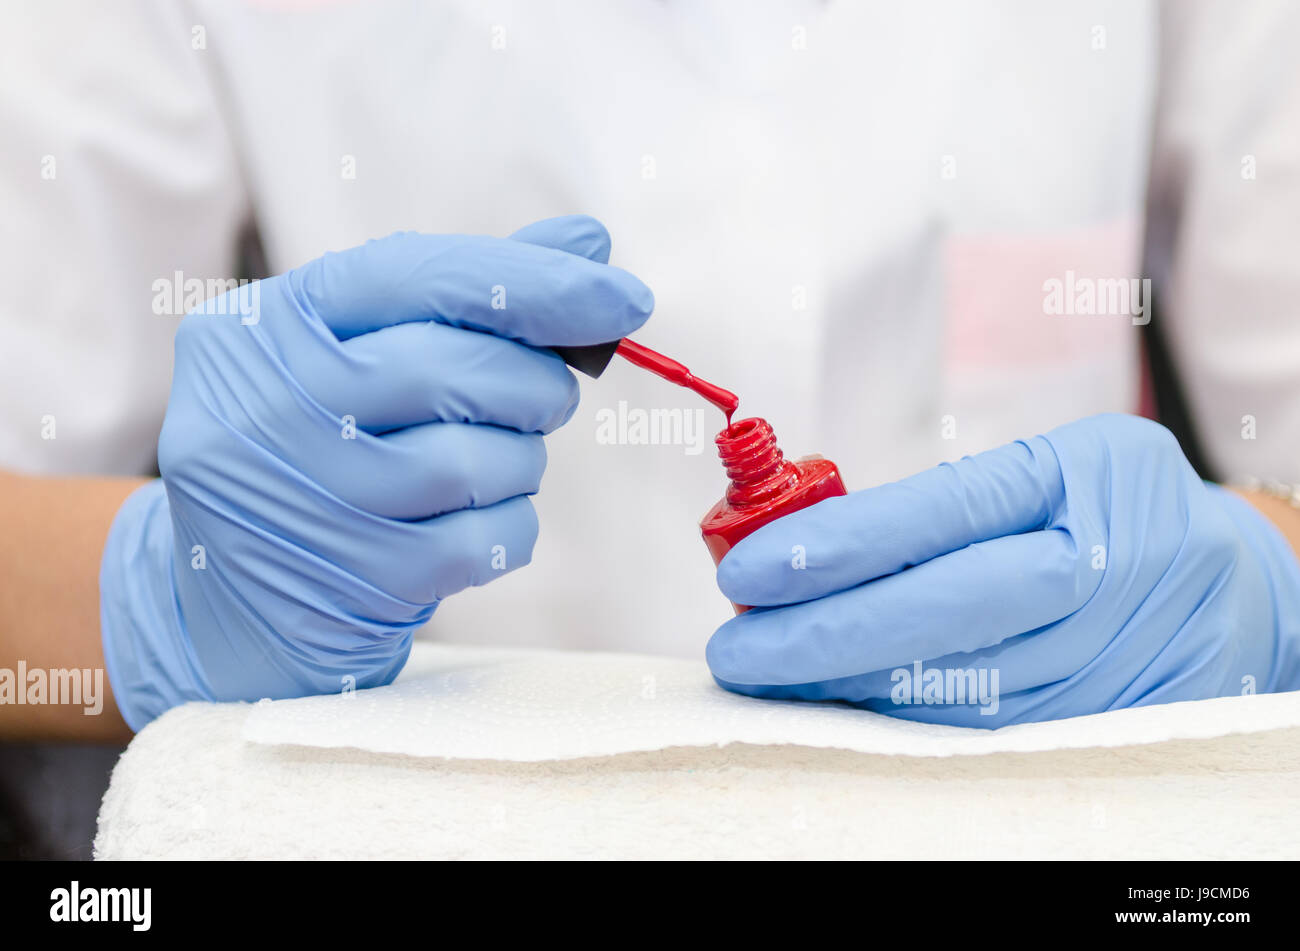 Female hand with gloves opens a bottle of red lacquer Stock Photo